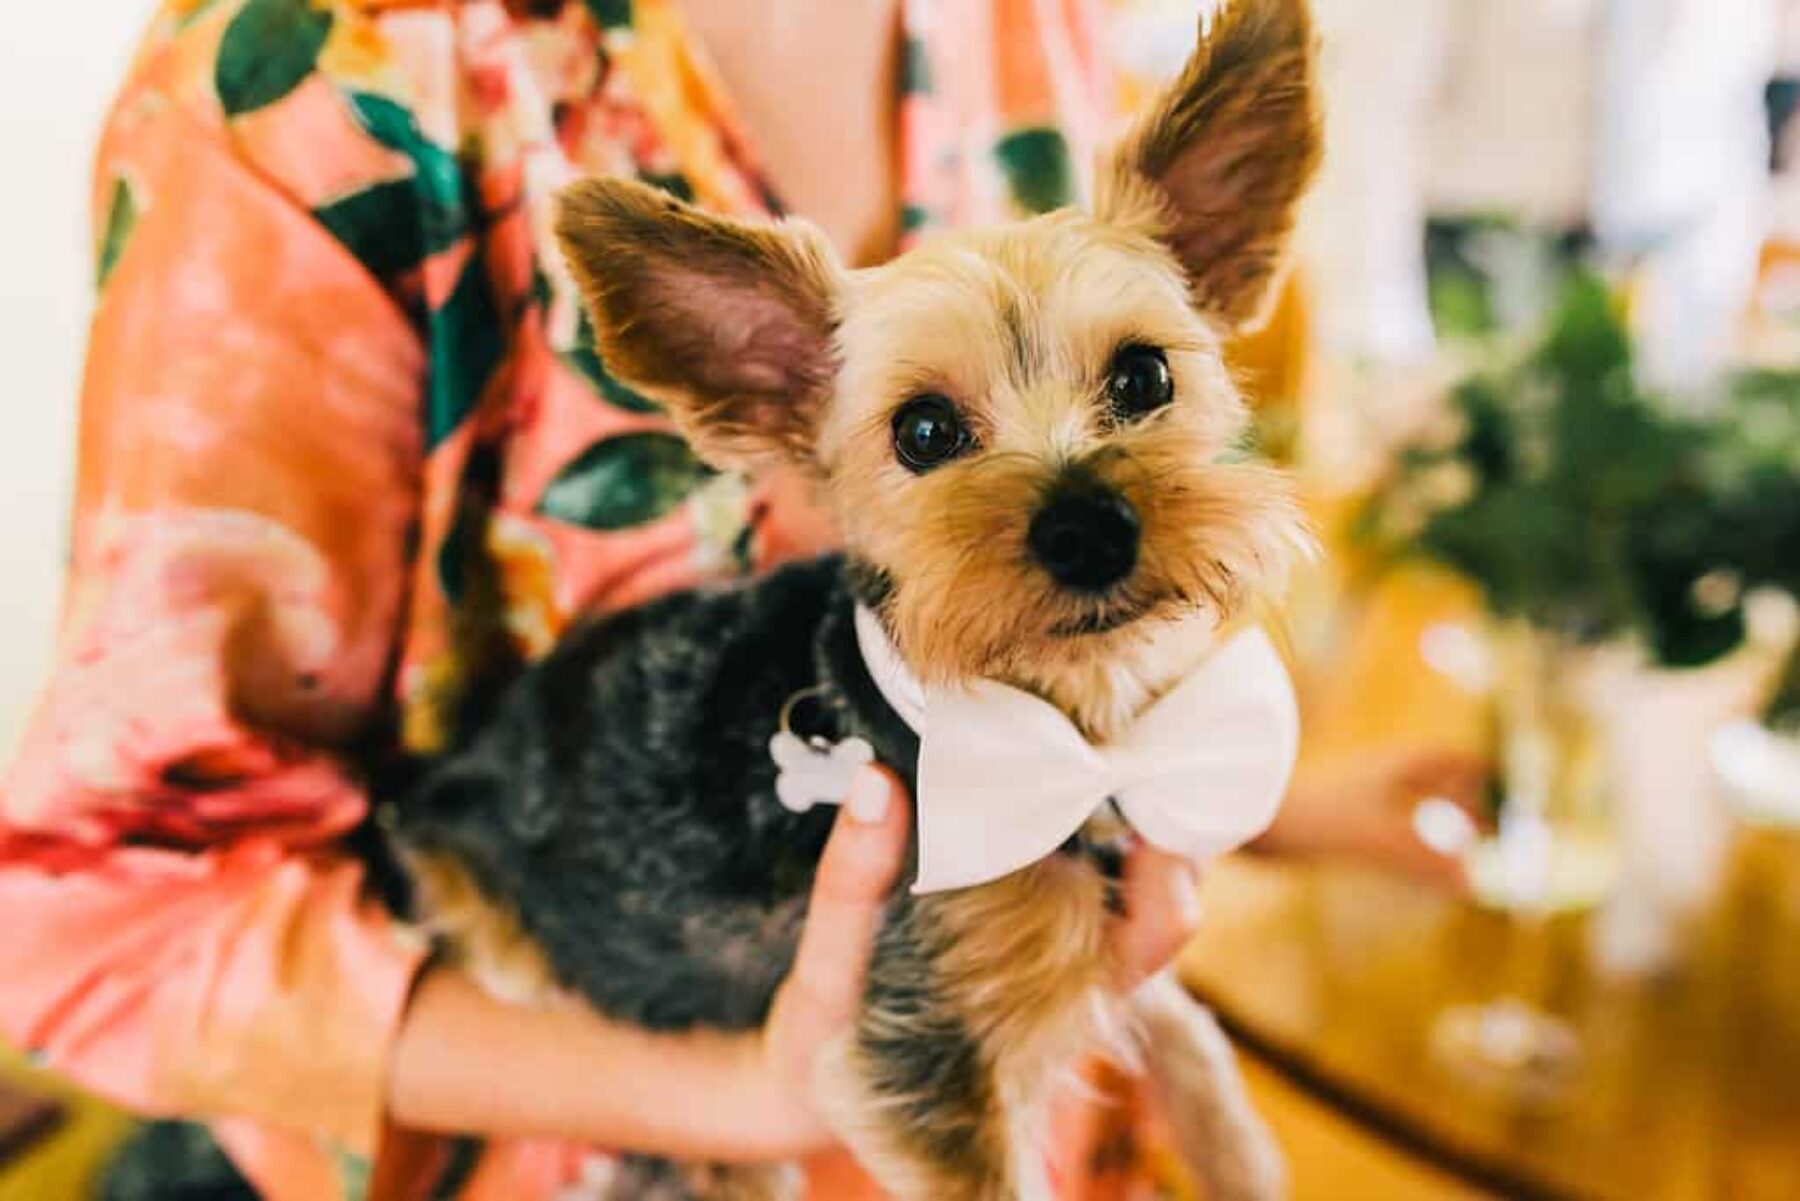 wedding pup with bow tie